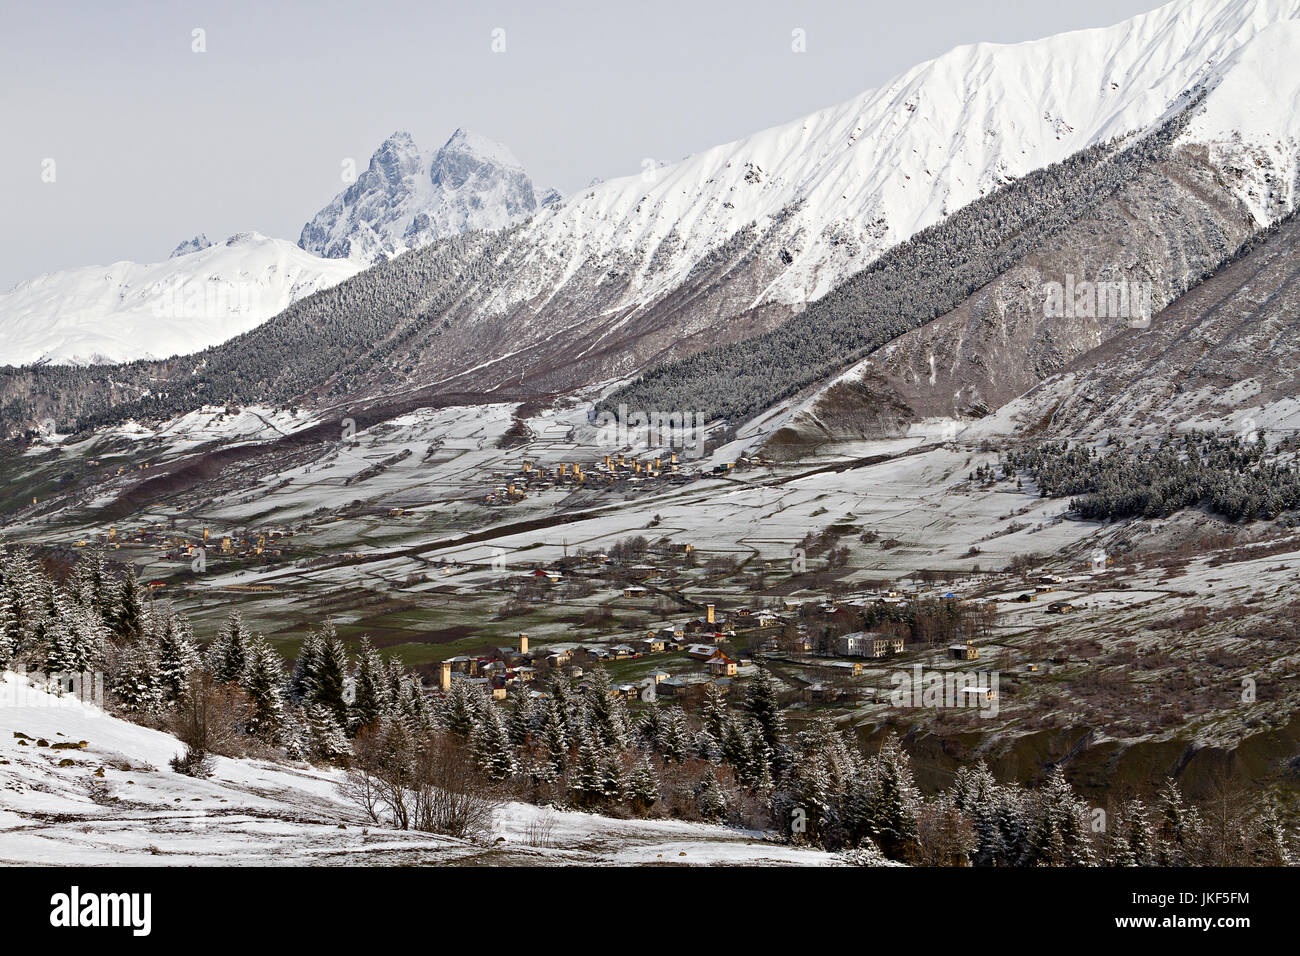 Mt Ushba, one of the peaks of the Caucasus Mountains and medieval tower villages, in Georgia. Stock Photo